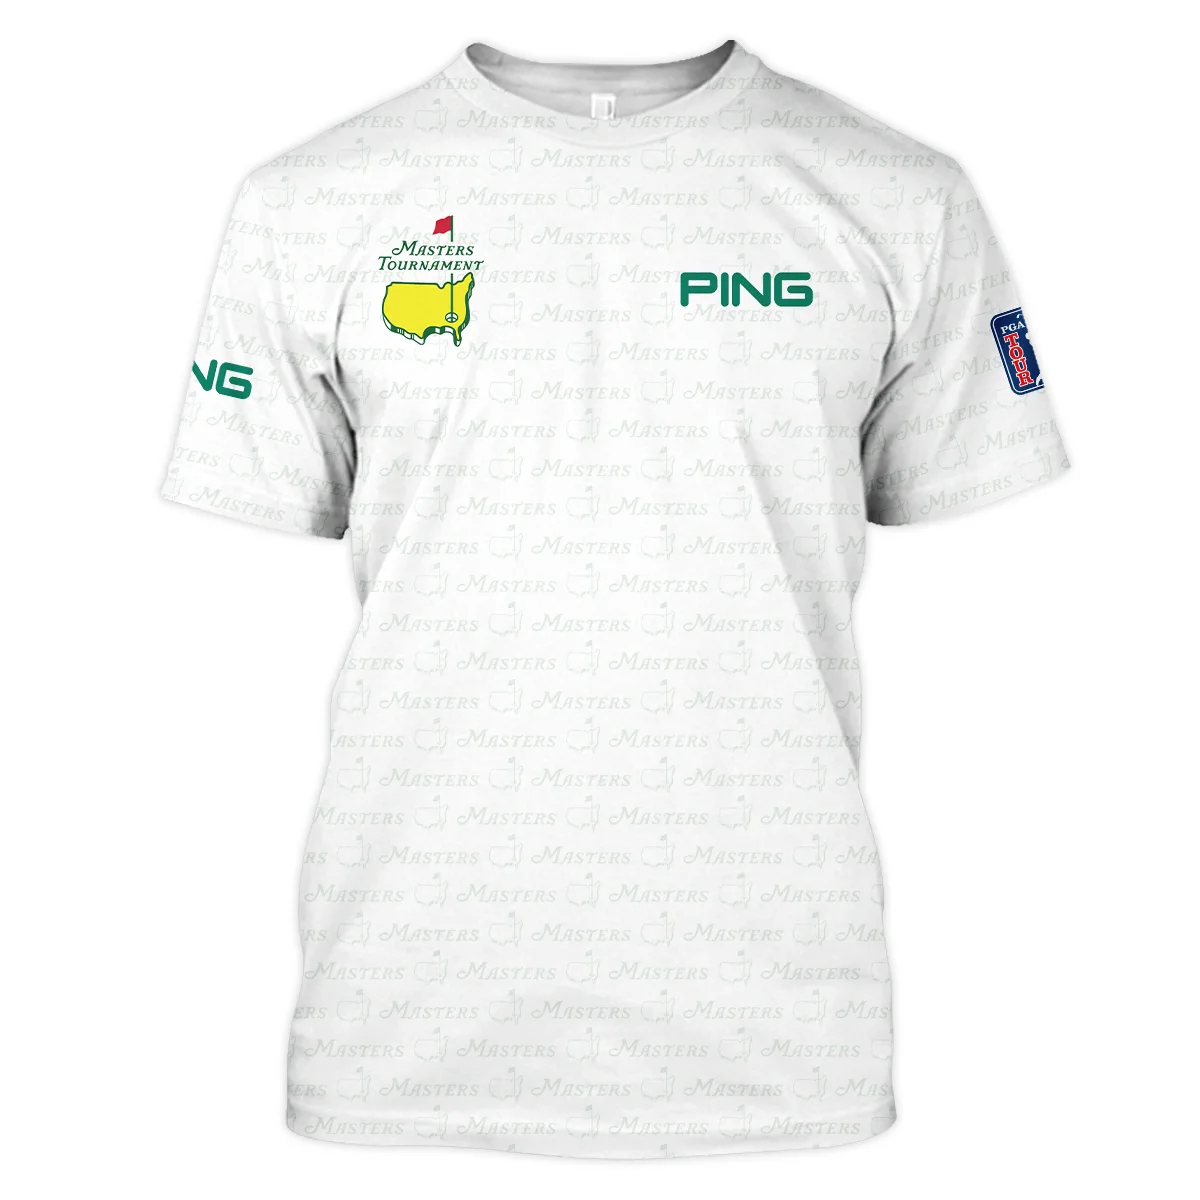 Pattern Masters Tournament Ping Polo Shirt White Green Sport Love Clothing Polo Shirt For Men